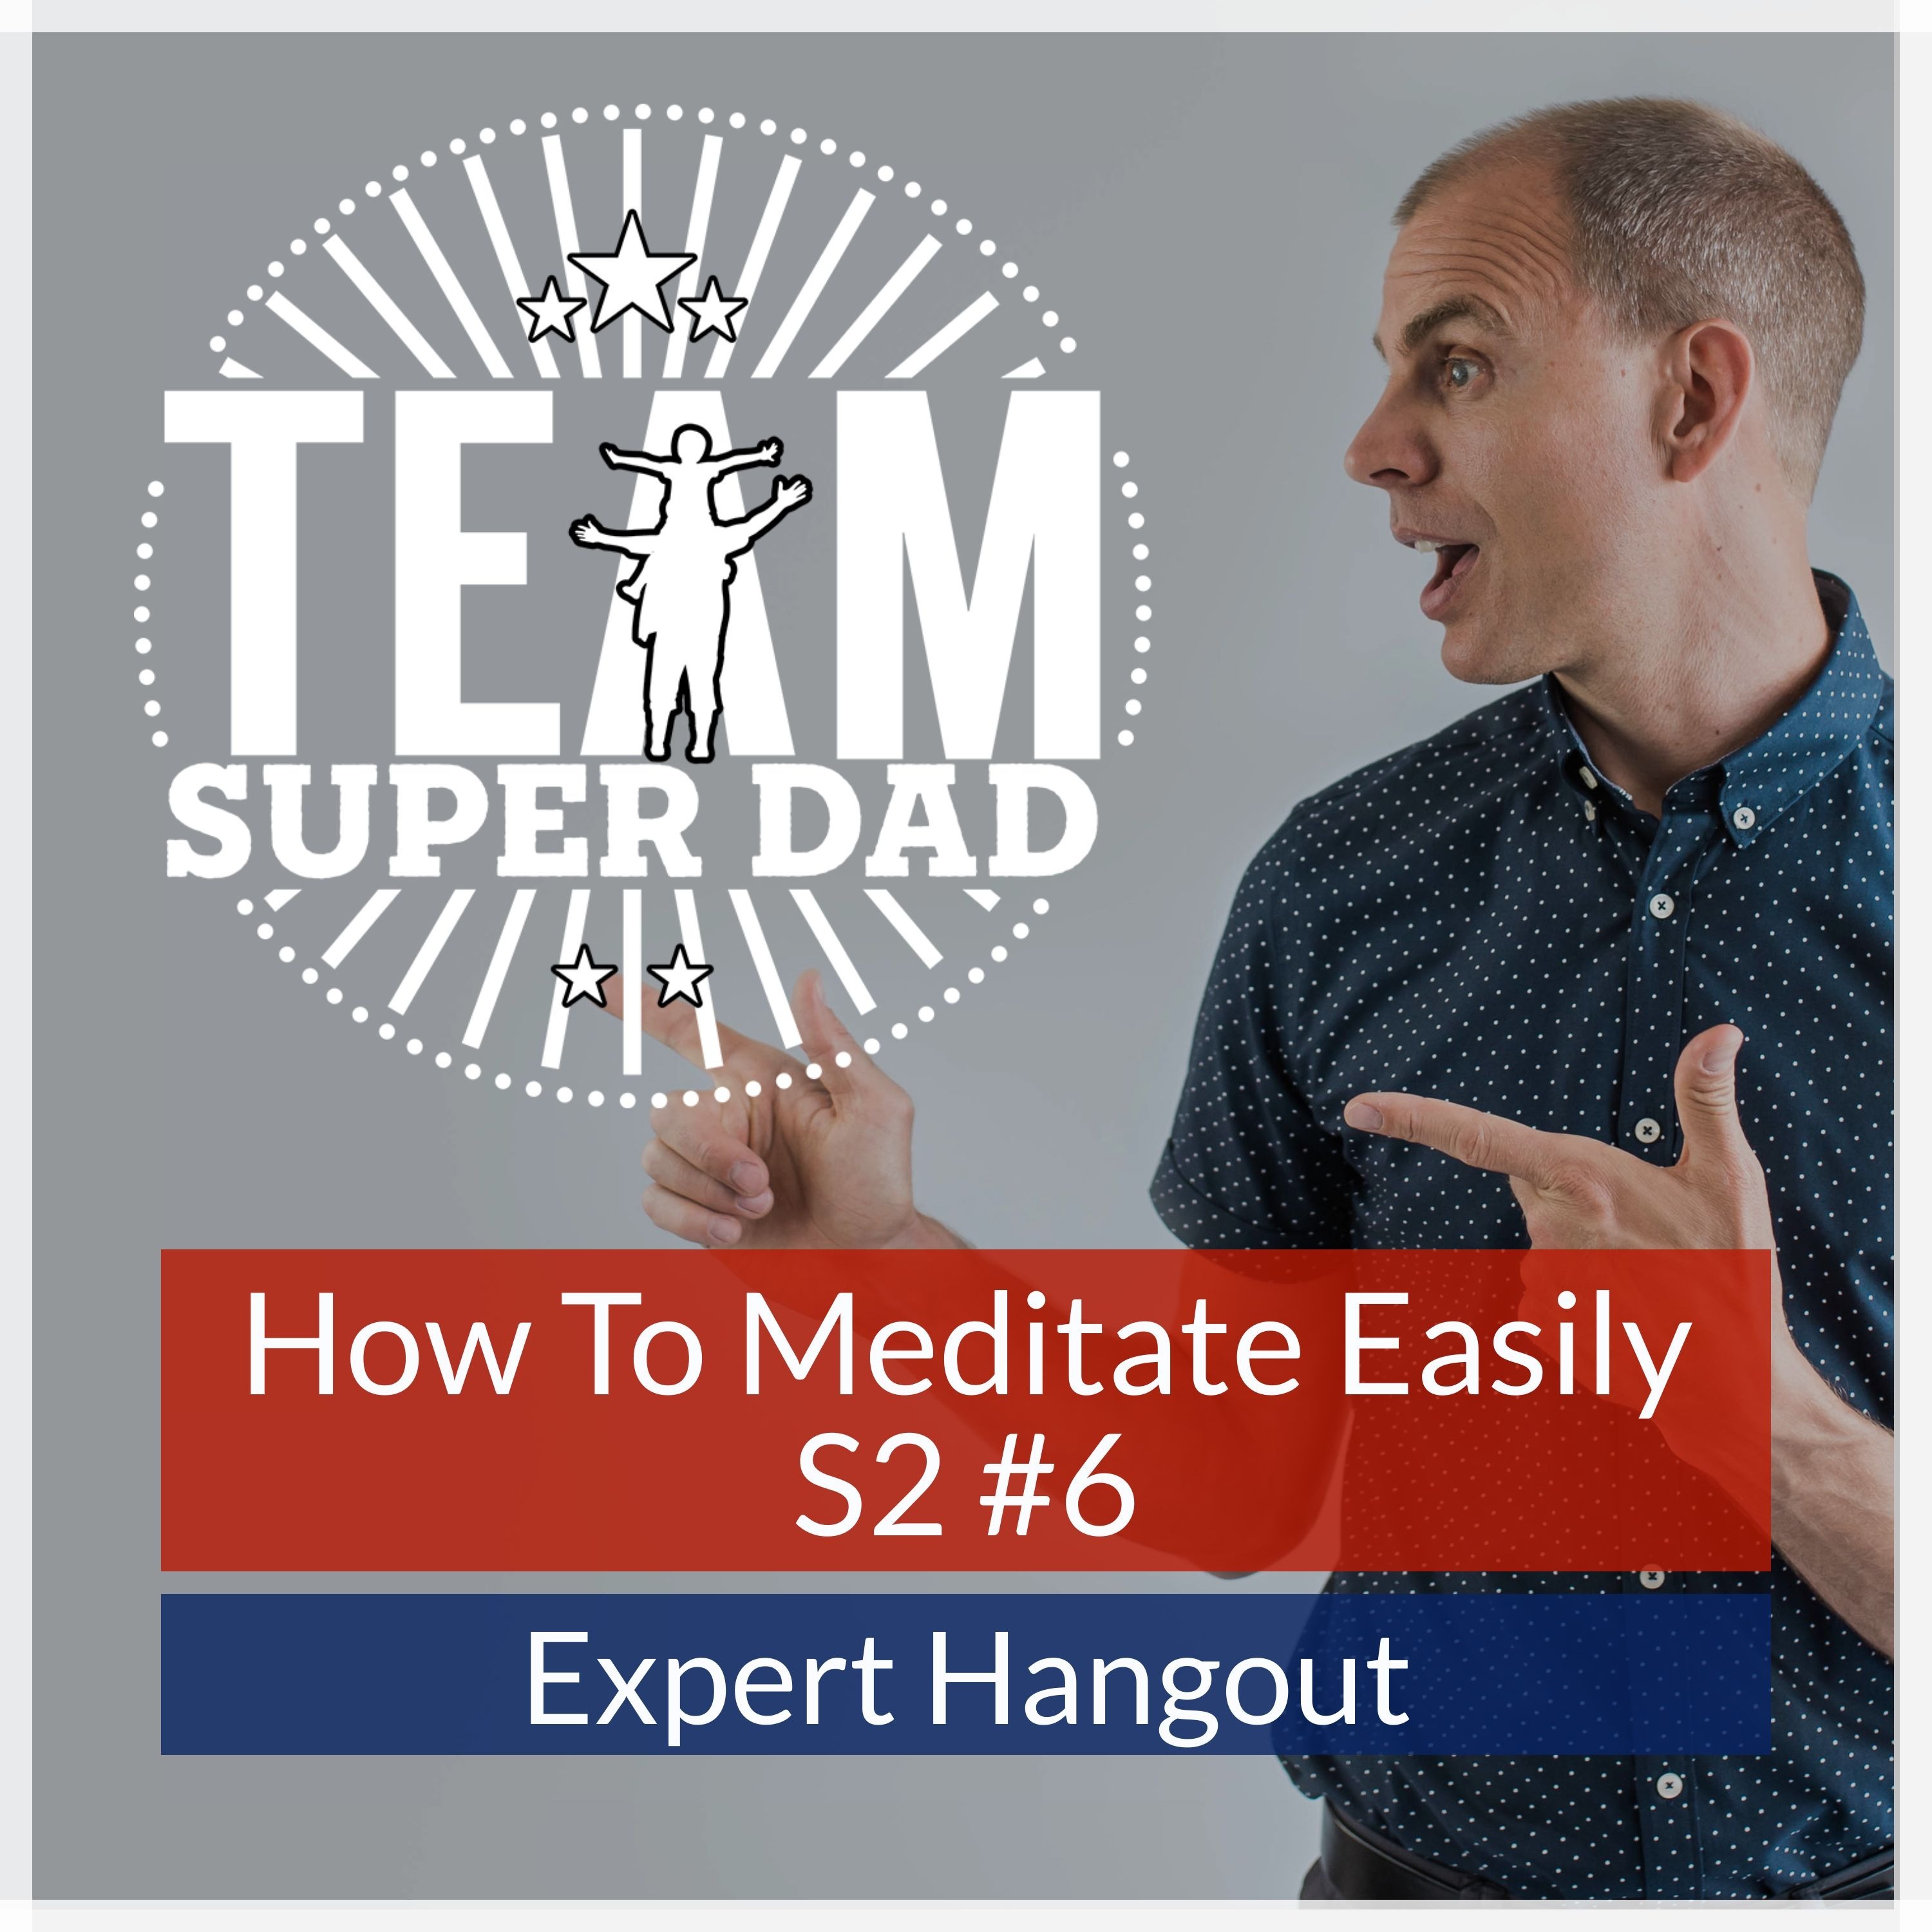 How To Meditate Easily - Expert Hangout Podcast